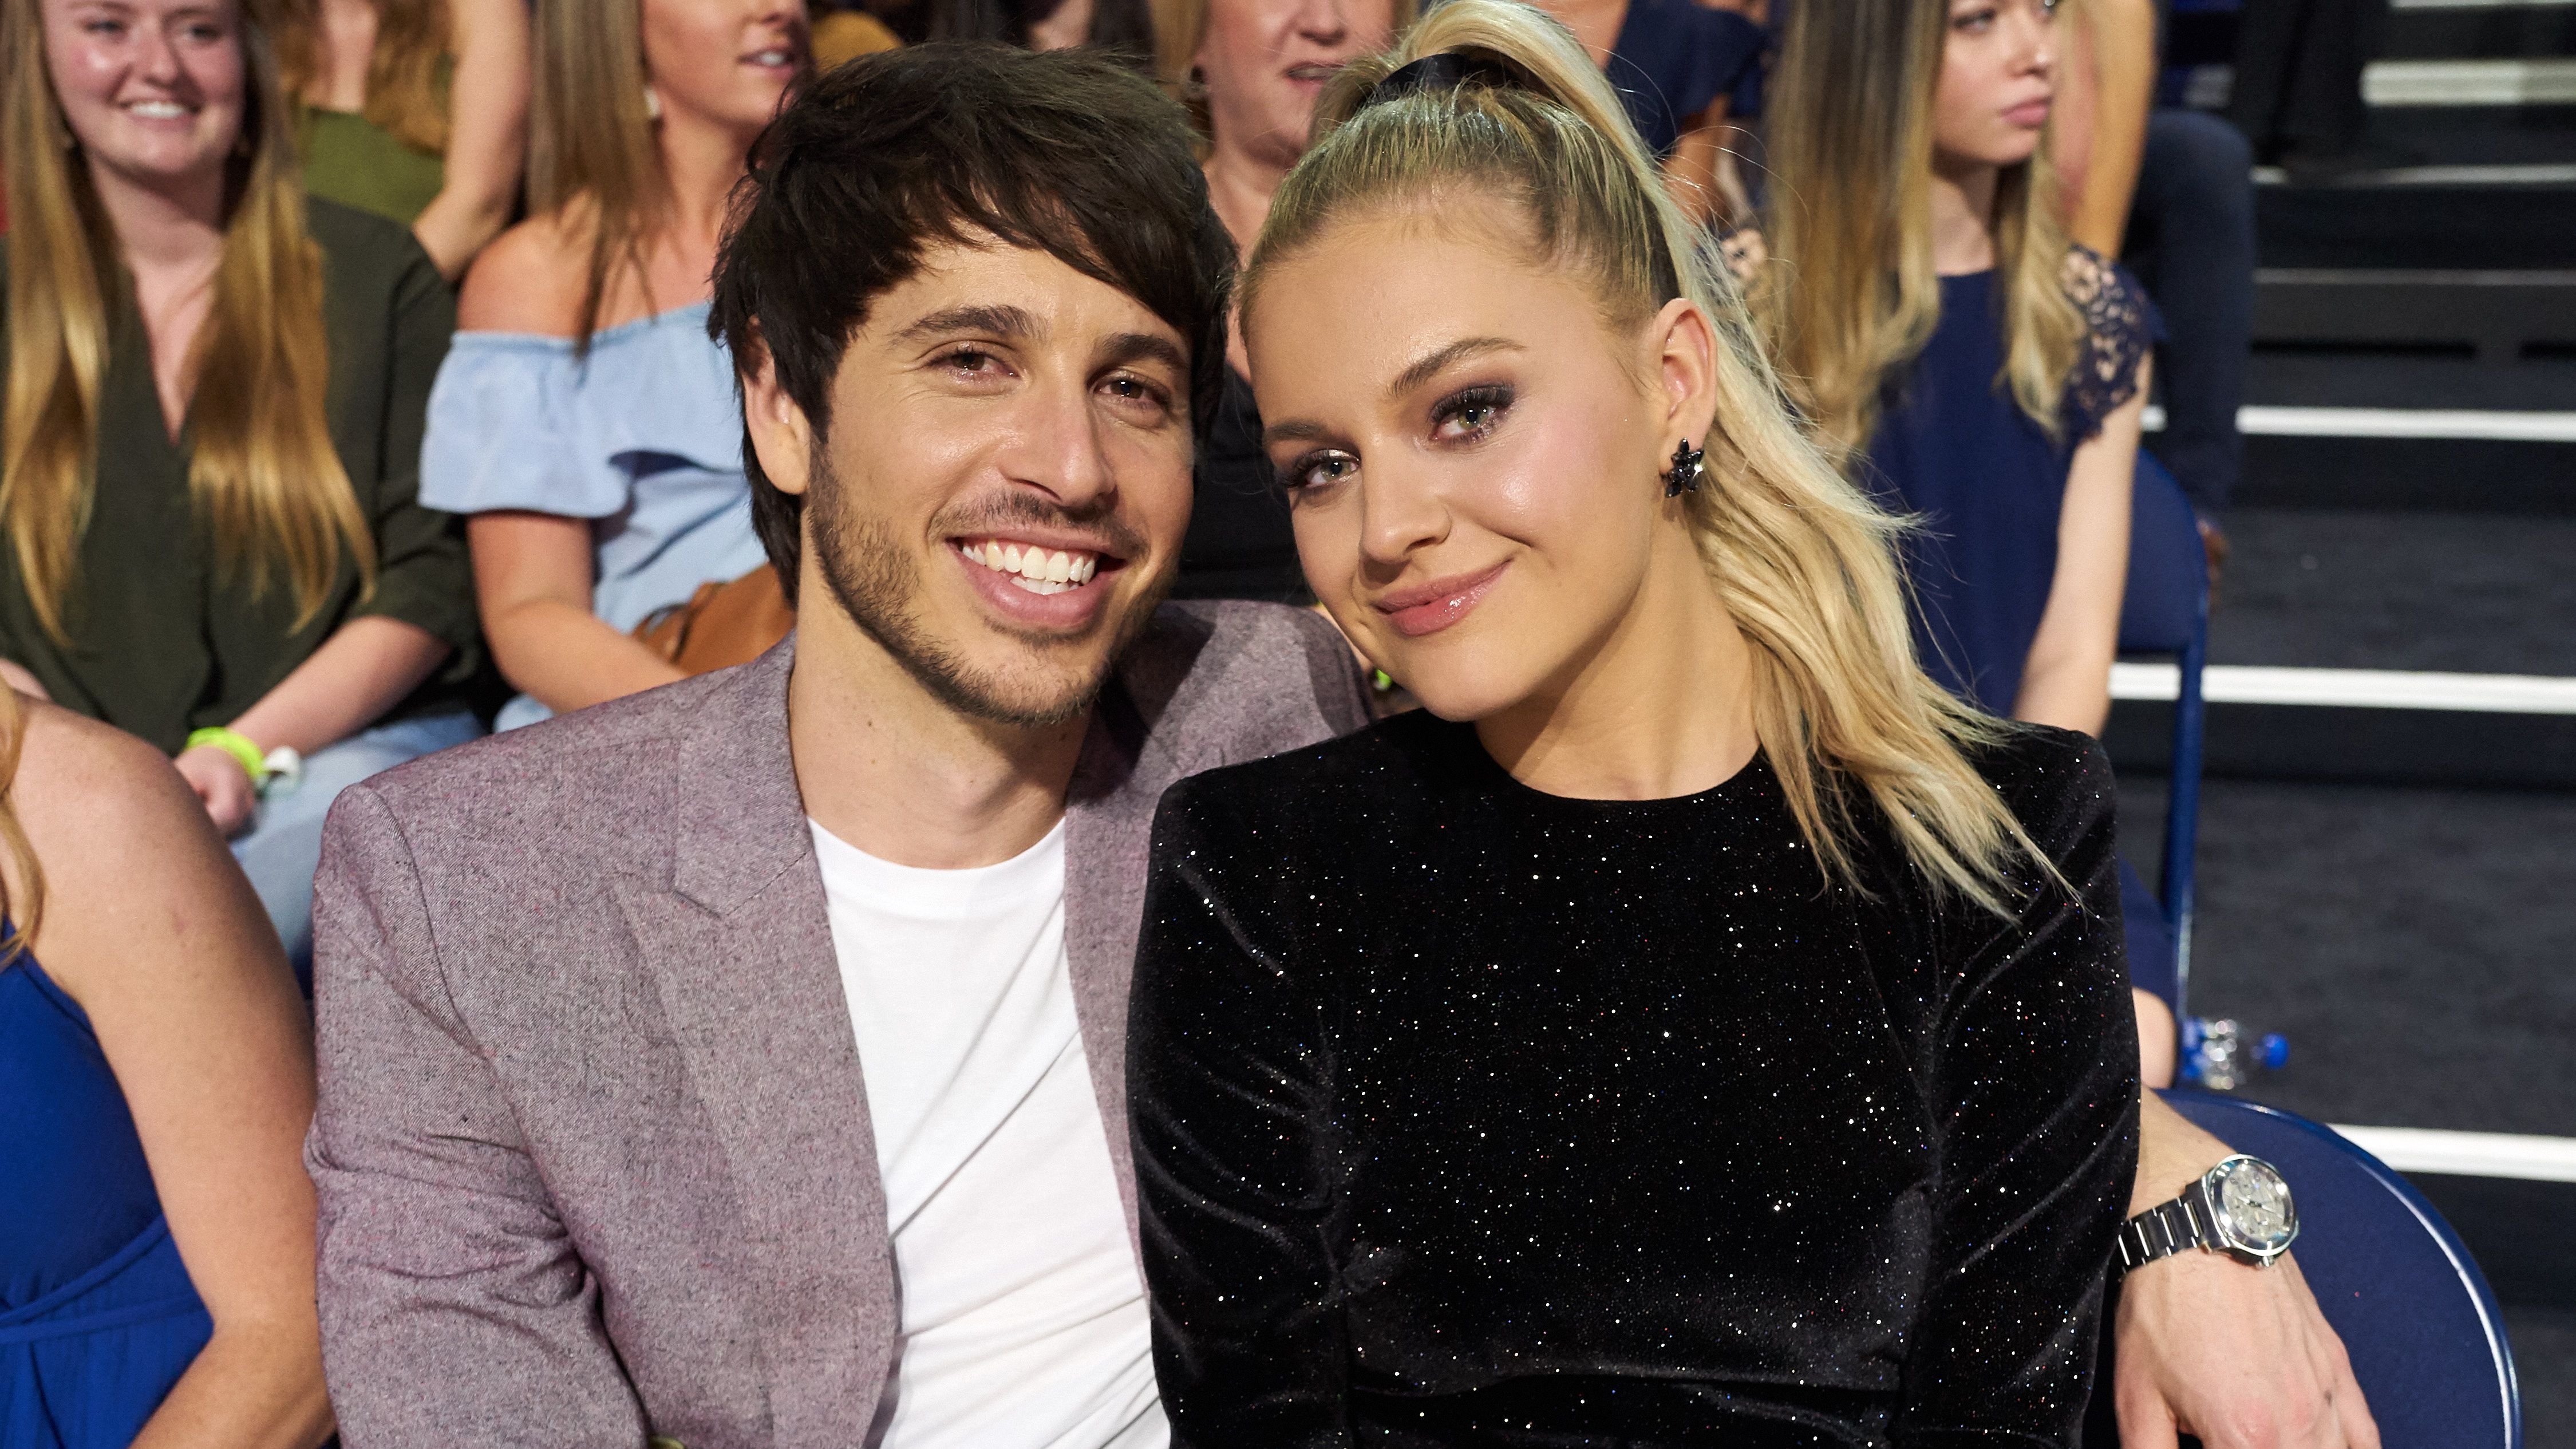 Why Kelsea Ballerini and Morgan Evans Are Getting Divorced